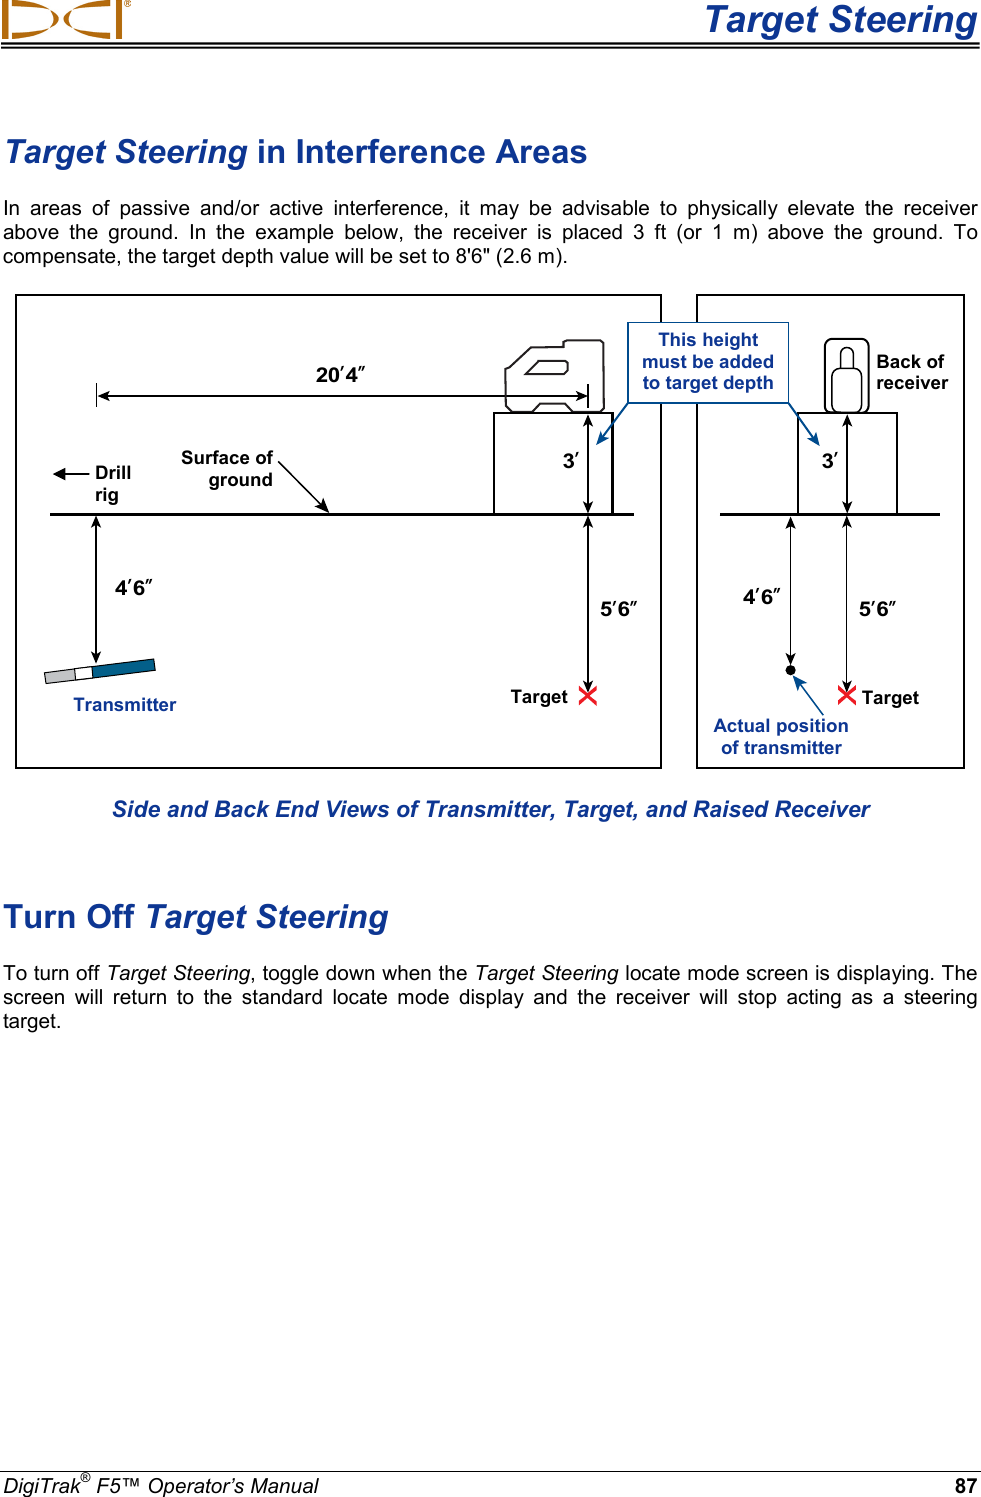  Target Steering DigiTrak® F5™ Operator’s Manual 87 Target Steering in Interference Areas In areas of passive and/or active interference, it may be advisable to physically elevate the receiver above the ground.  In the example below,  the receiver is placed 3 ft (or  1  m) above the ground. To compensate, the target depth value will be set to 8&apos;6&quot; (2.6 m). 20’4”4’6”5’6”5’6”4’6”3’3’ Side and Back End Views of Transmitter, Target, and Raised Receiver   Turn Off Target Steering To turn off Target Steering, toggle down when the Target Steering locate mode screen is displaying. The screen will return to the standard locate mode display and the receiver will stop acting as a steering target.  Drill  rig Surface of ground Back of receiver Target Transmitter Target Actual position of transmitter This height must be added to target depth 